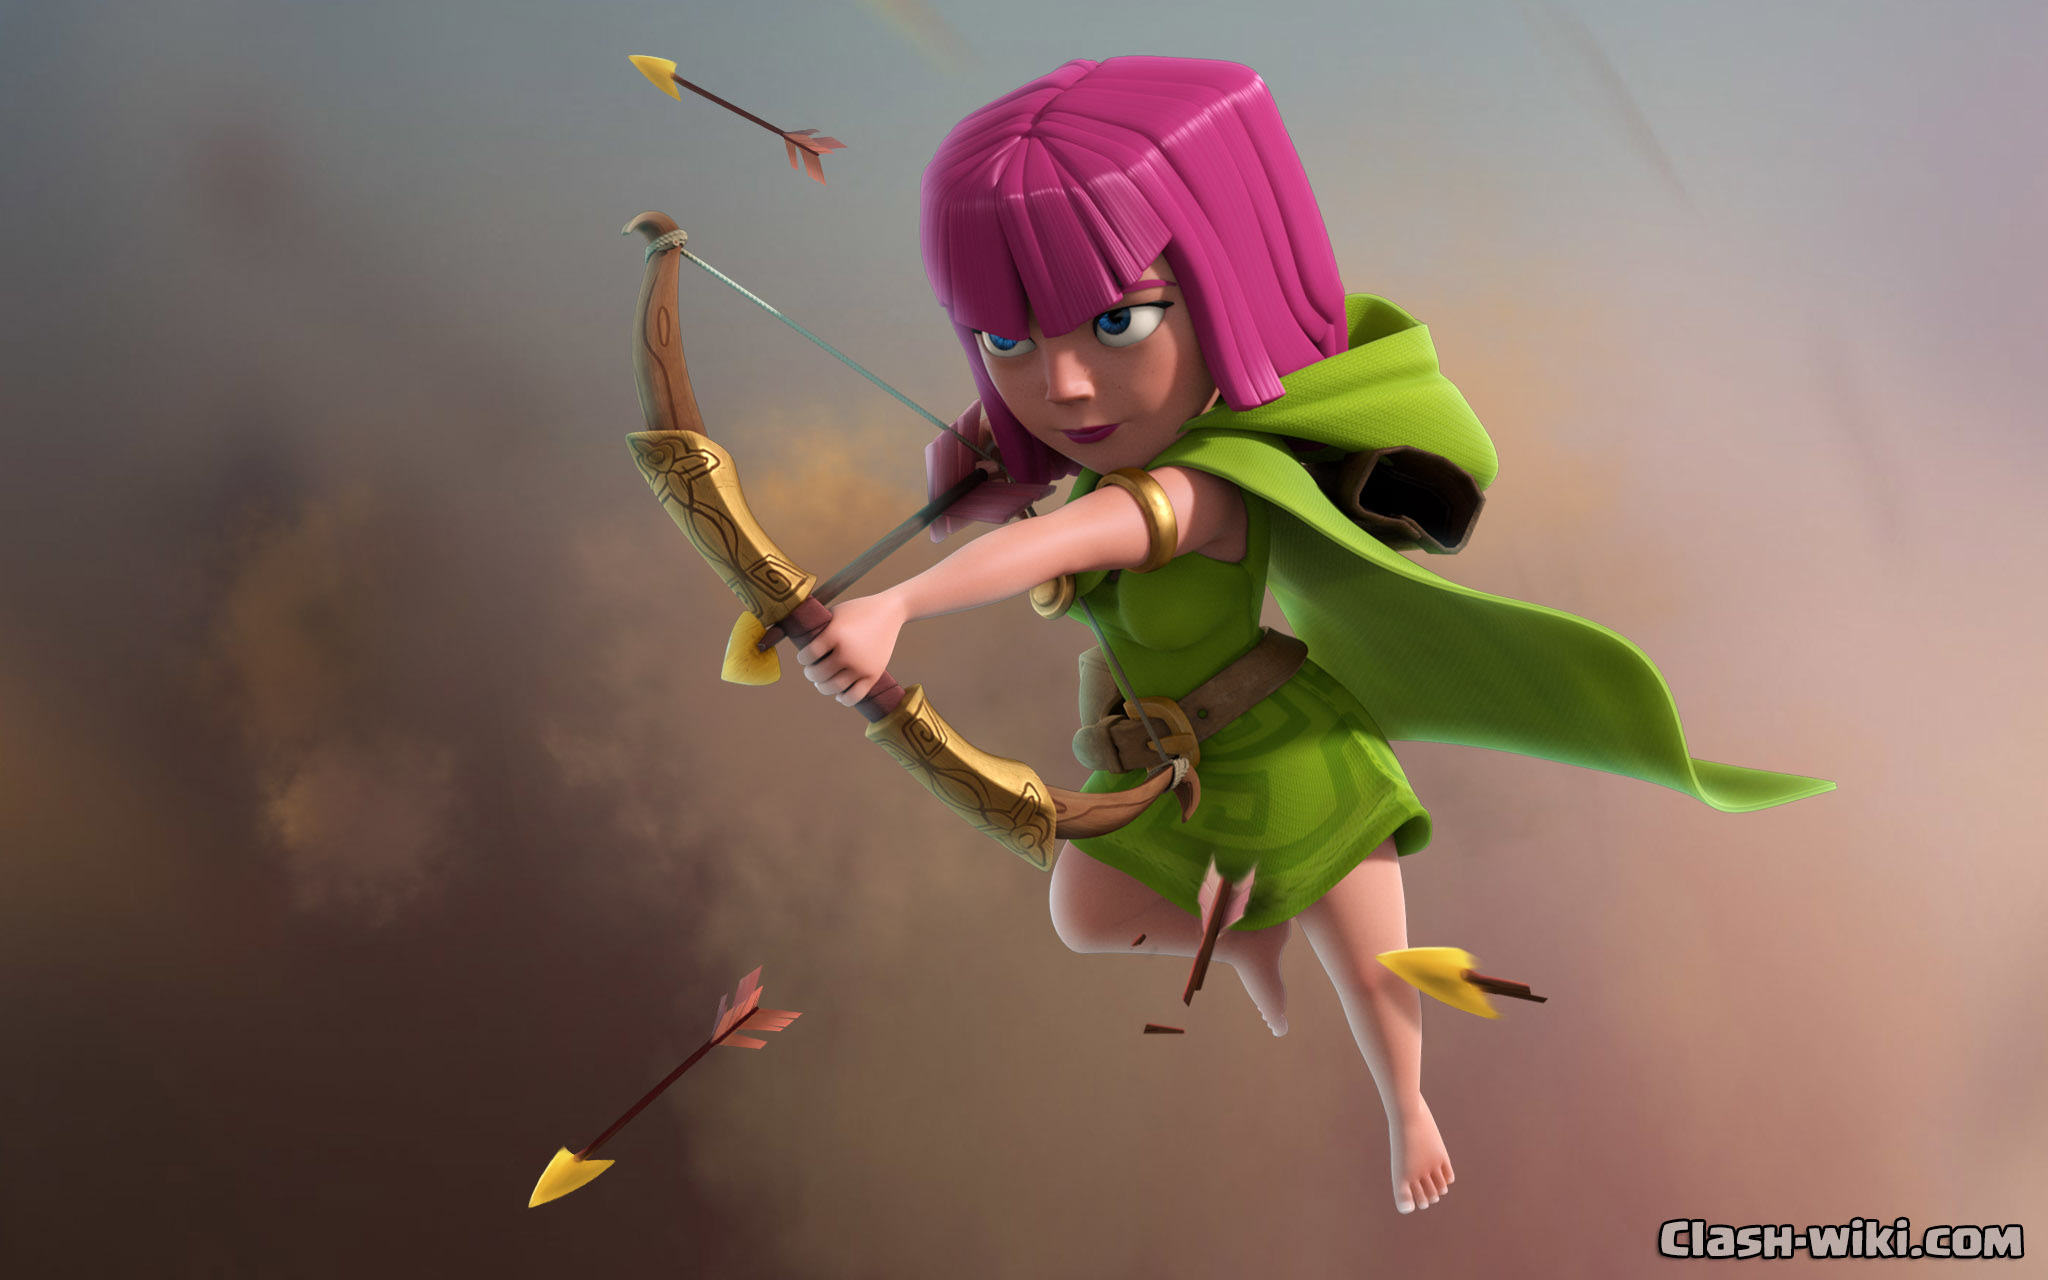 Clash Of Clans Wallpapers Clash Wikicom.